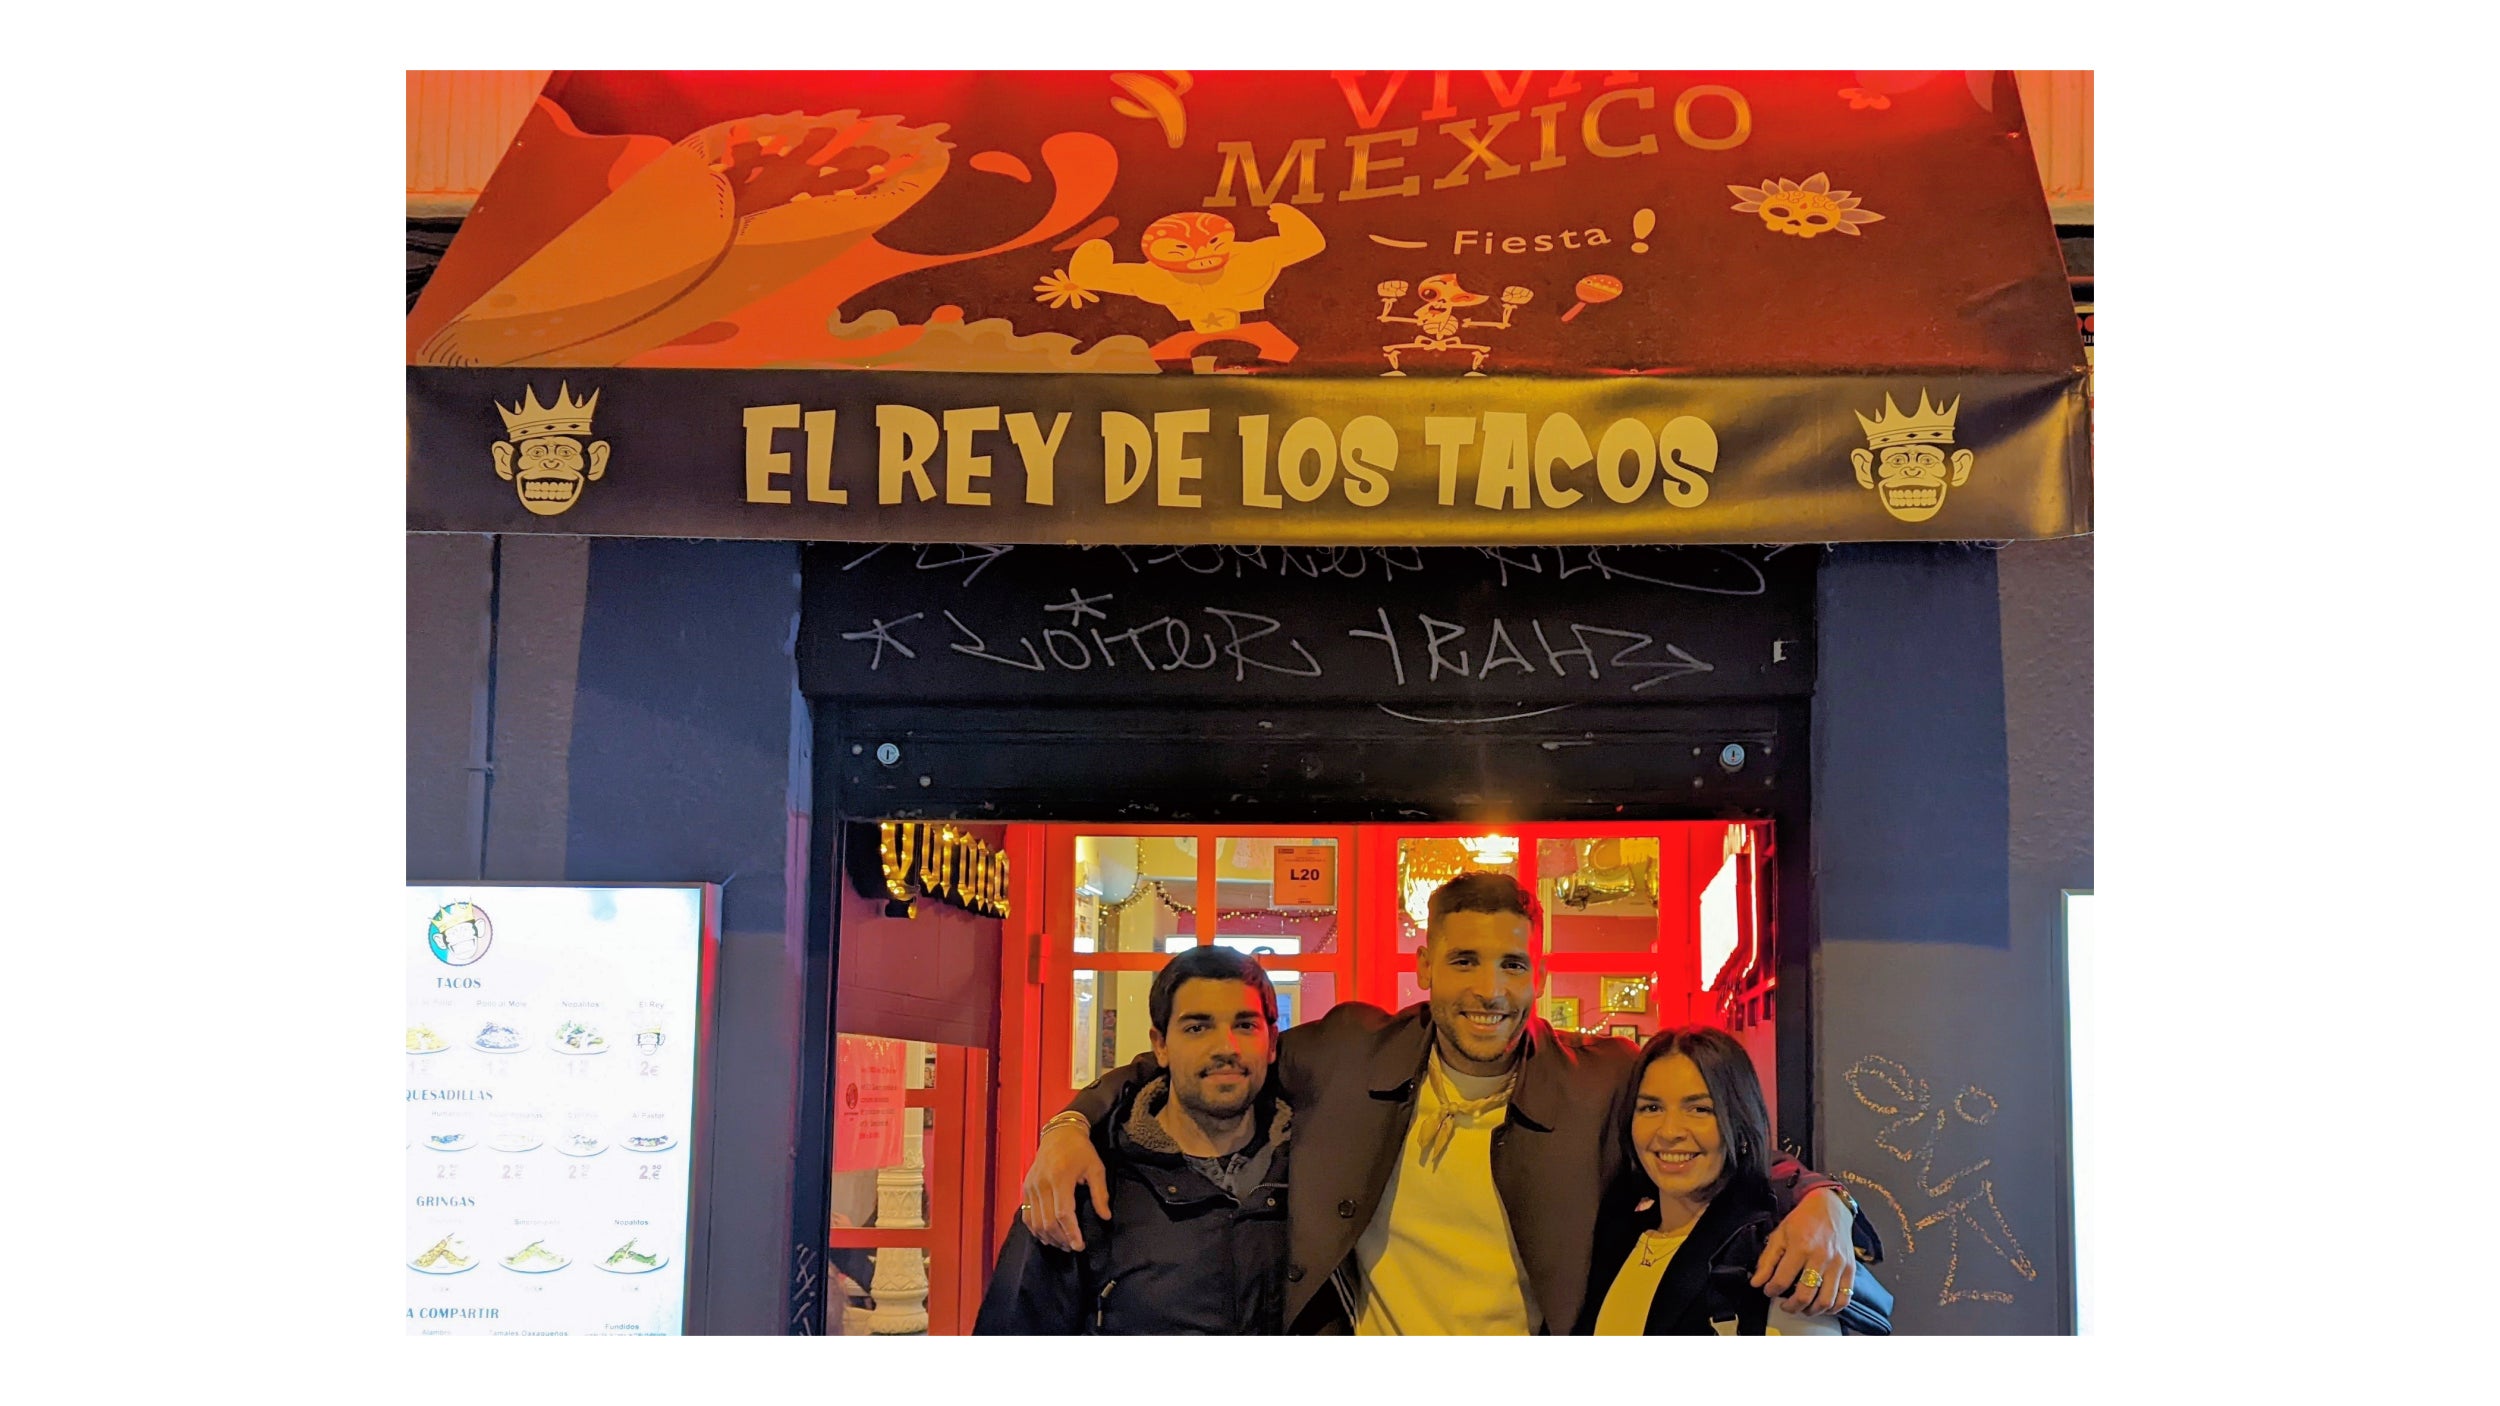 Here we are. Yes, that&#039;s the one. And yes, it was ShOt oN PiXel 6 PrO. - I met a breast implant dealer and a cowgirl in a Madrid taqueria and we did (not) take a photo